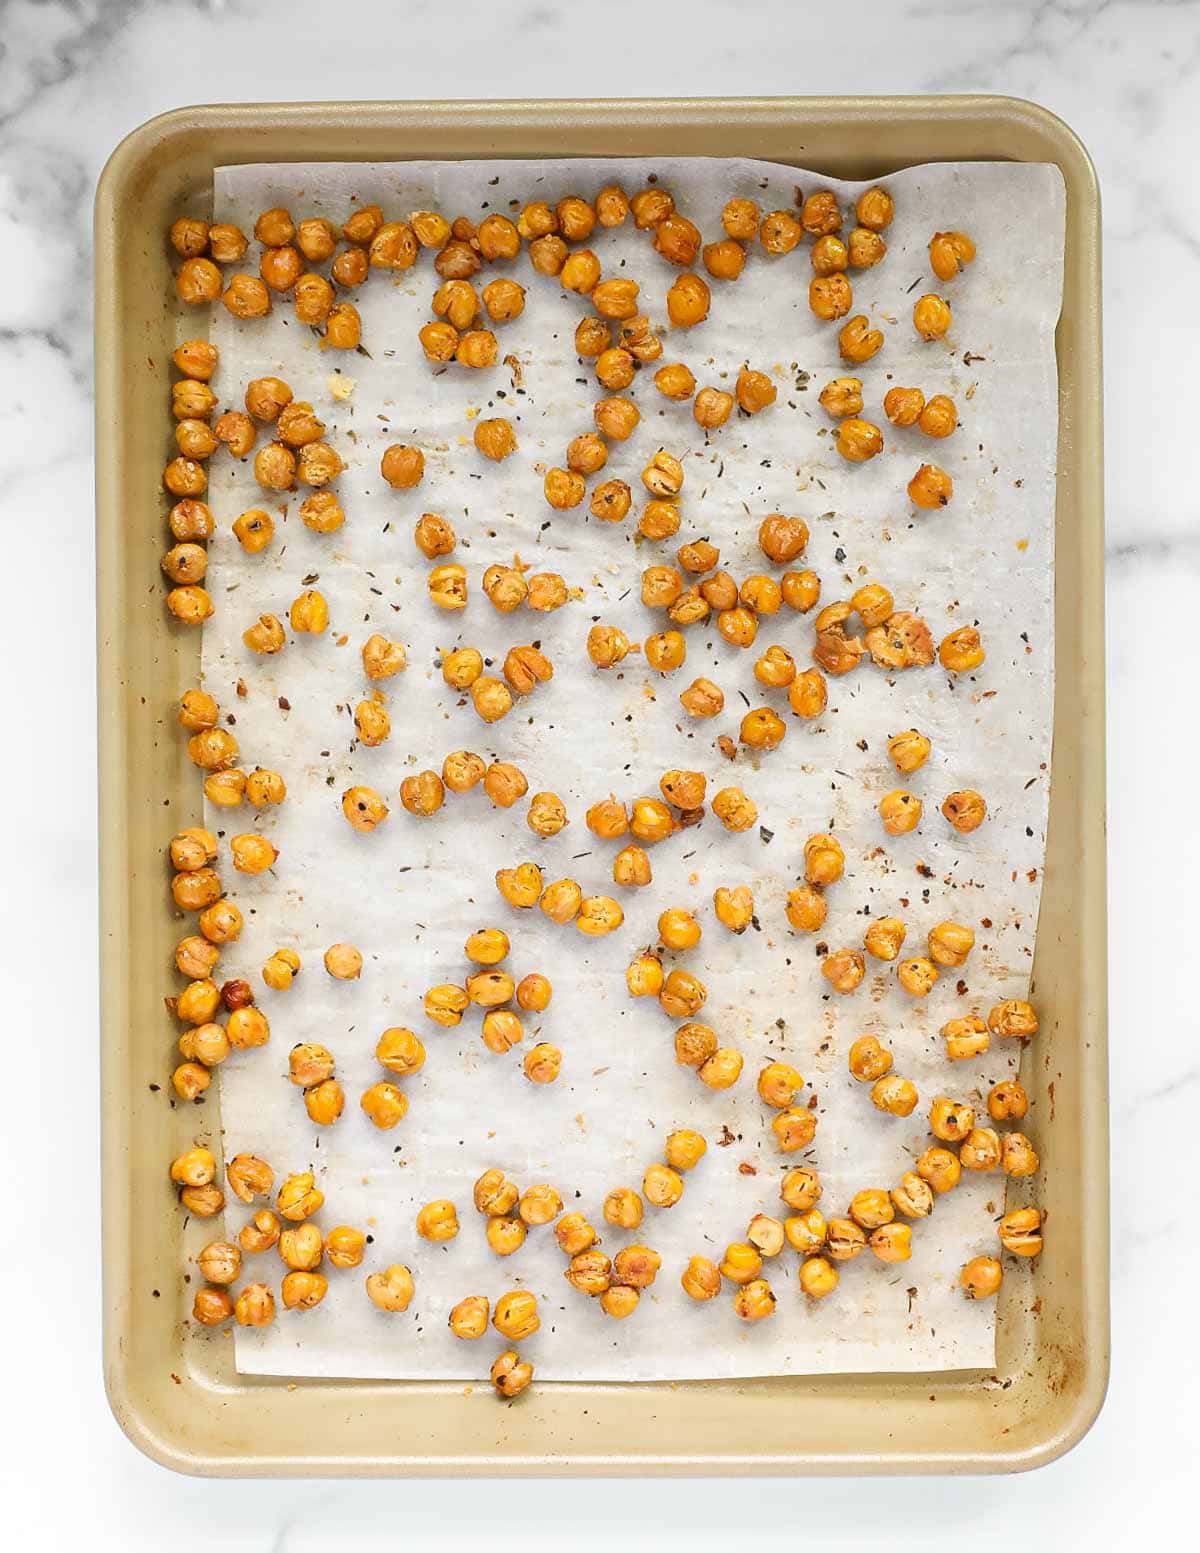 Chickpeas spread out on a piece of white parchment paper on a gold backing sheet.